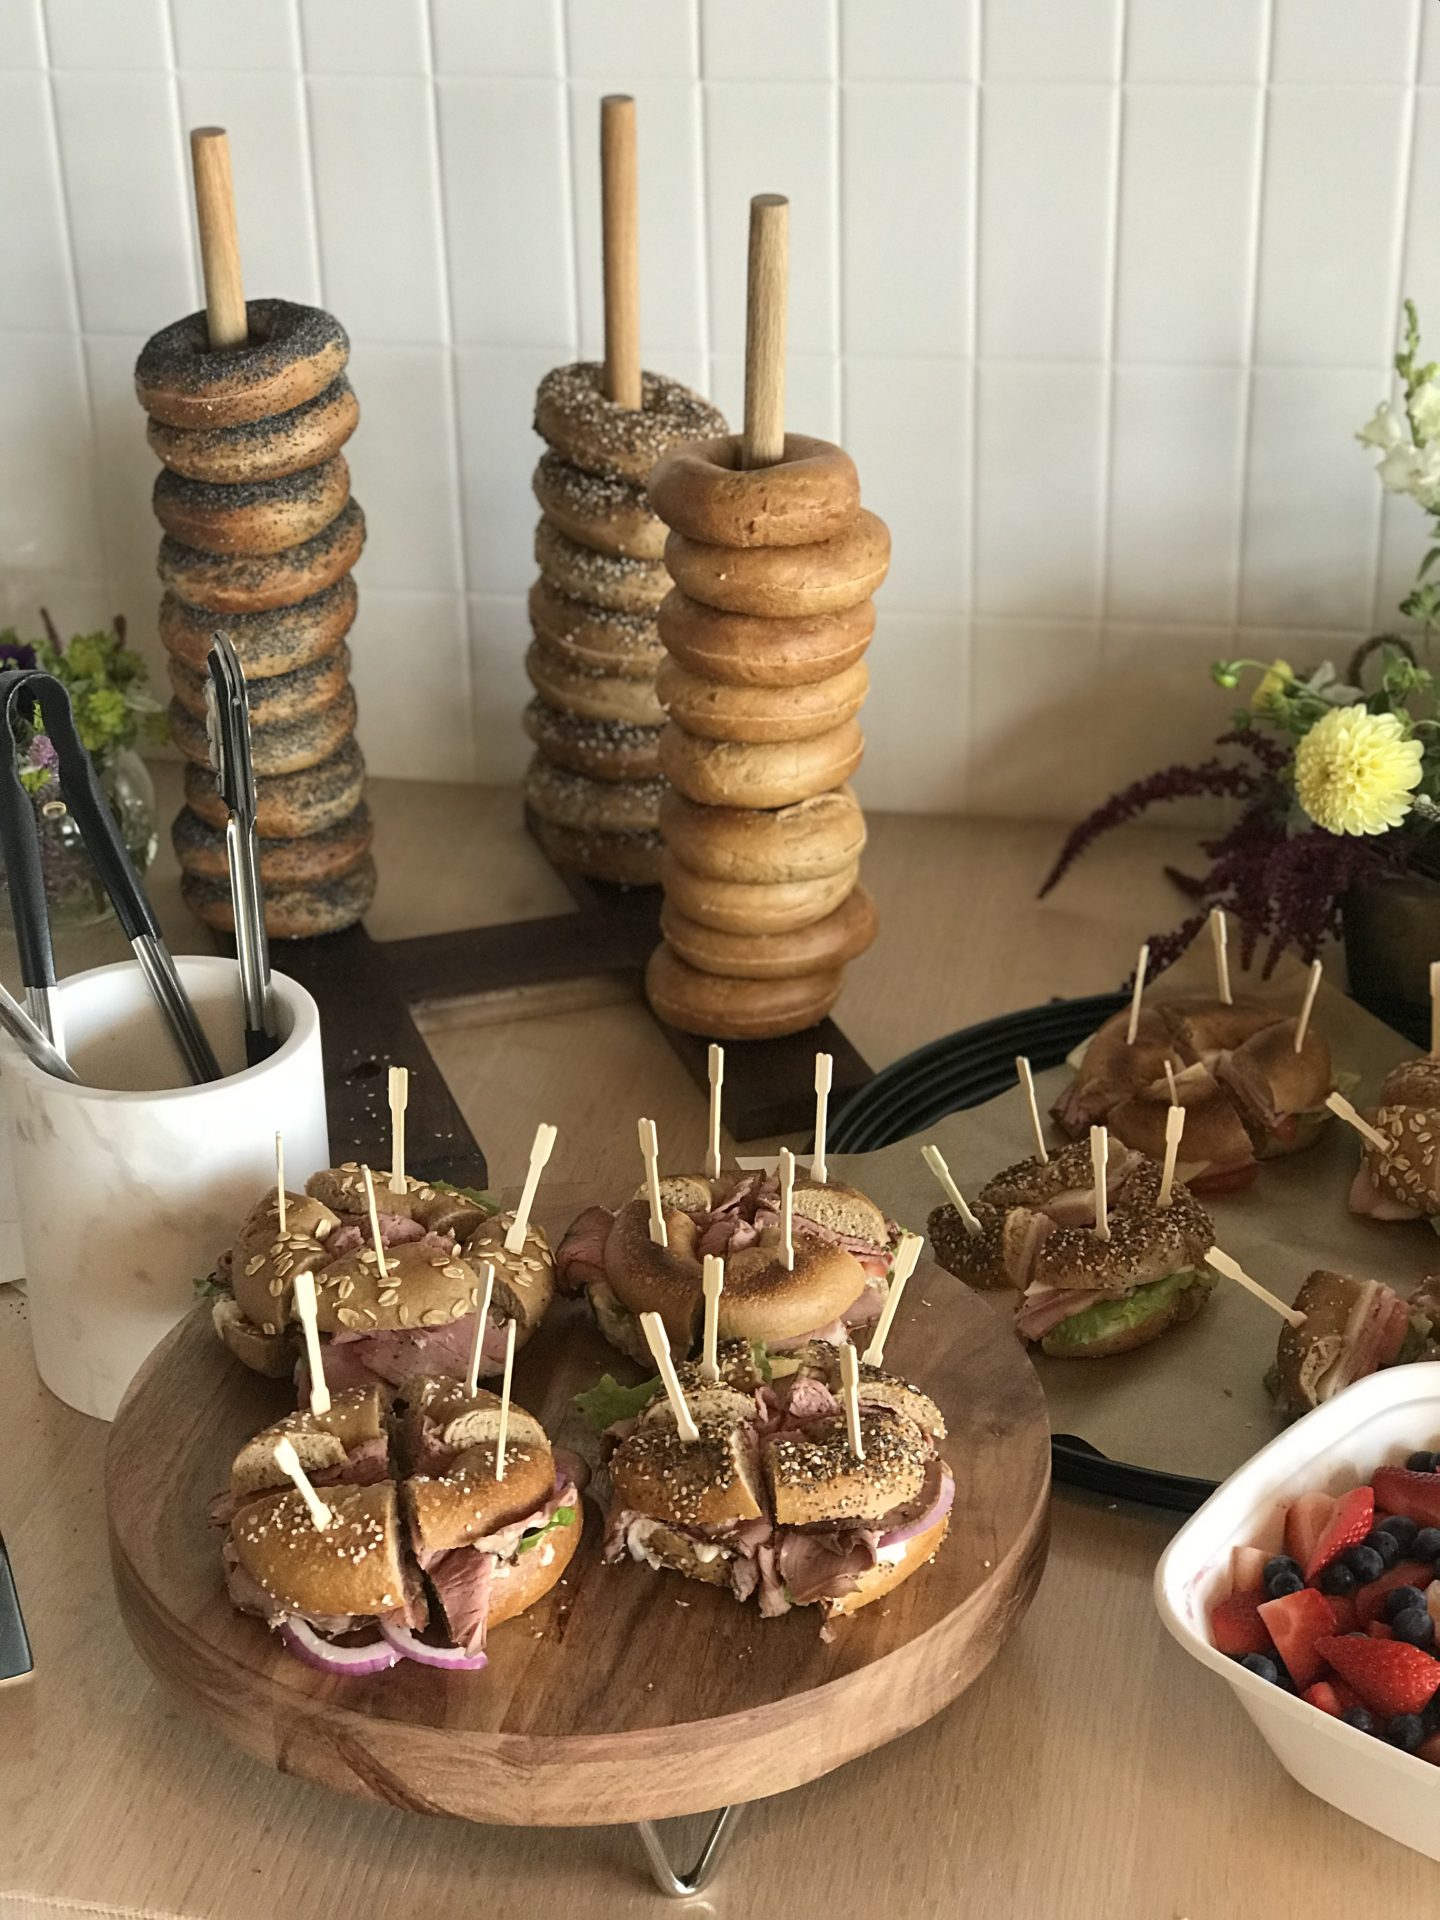 Bagels and sandwiches on a table